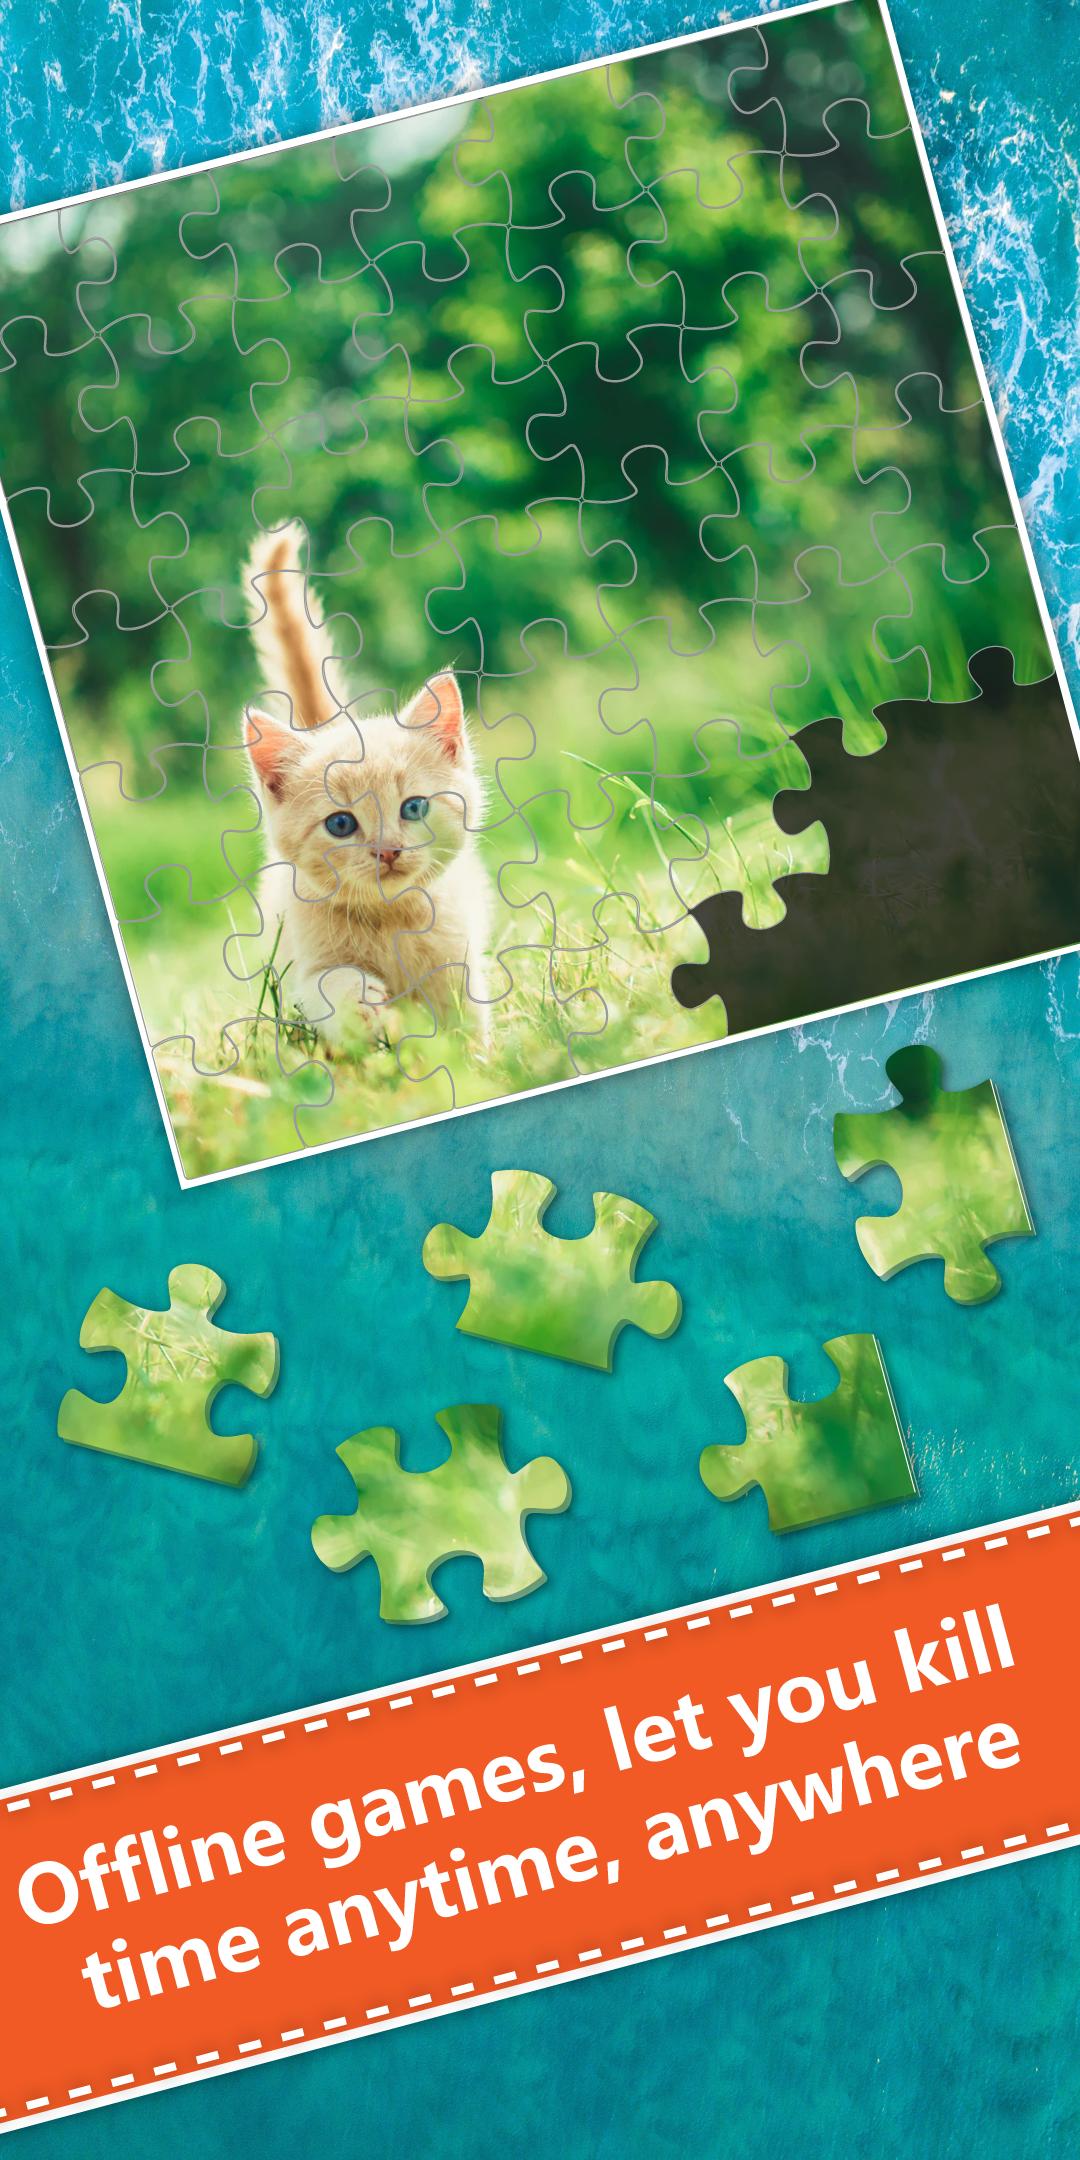 Jigsaw Game - 2000+ levels for Android - APK Download